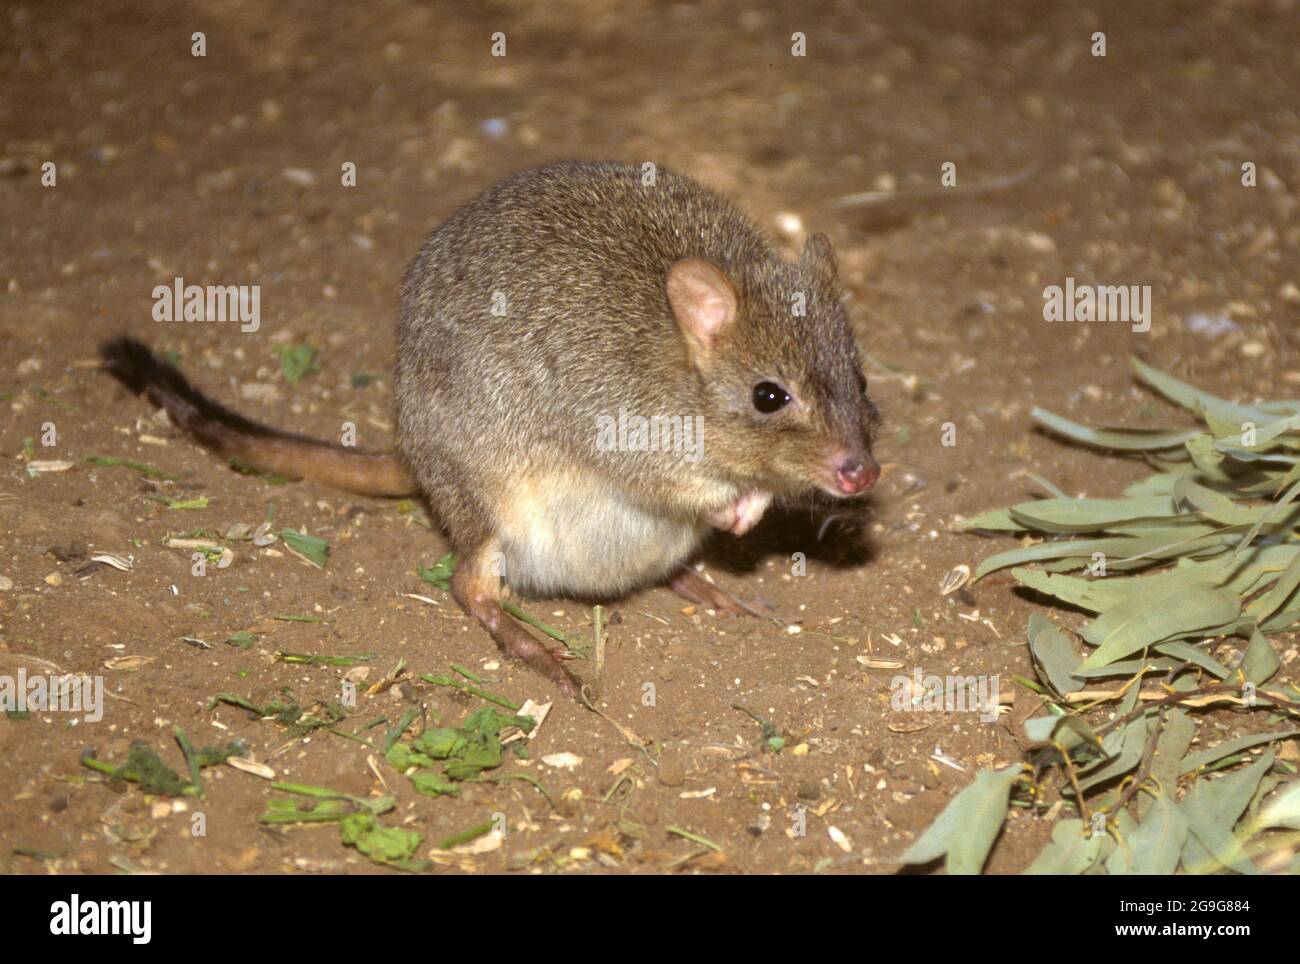 Brush-tailed bettong (Bettongia penicillata). Also known as the short-nosed rat kangaroo or the woylie, this animal is a small (30-40 centimetres long Stock Photo